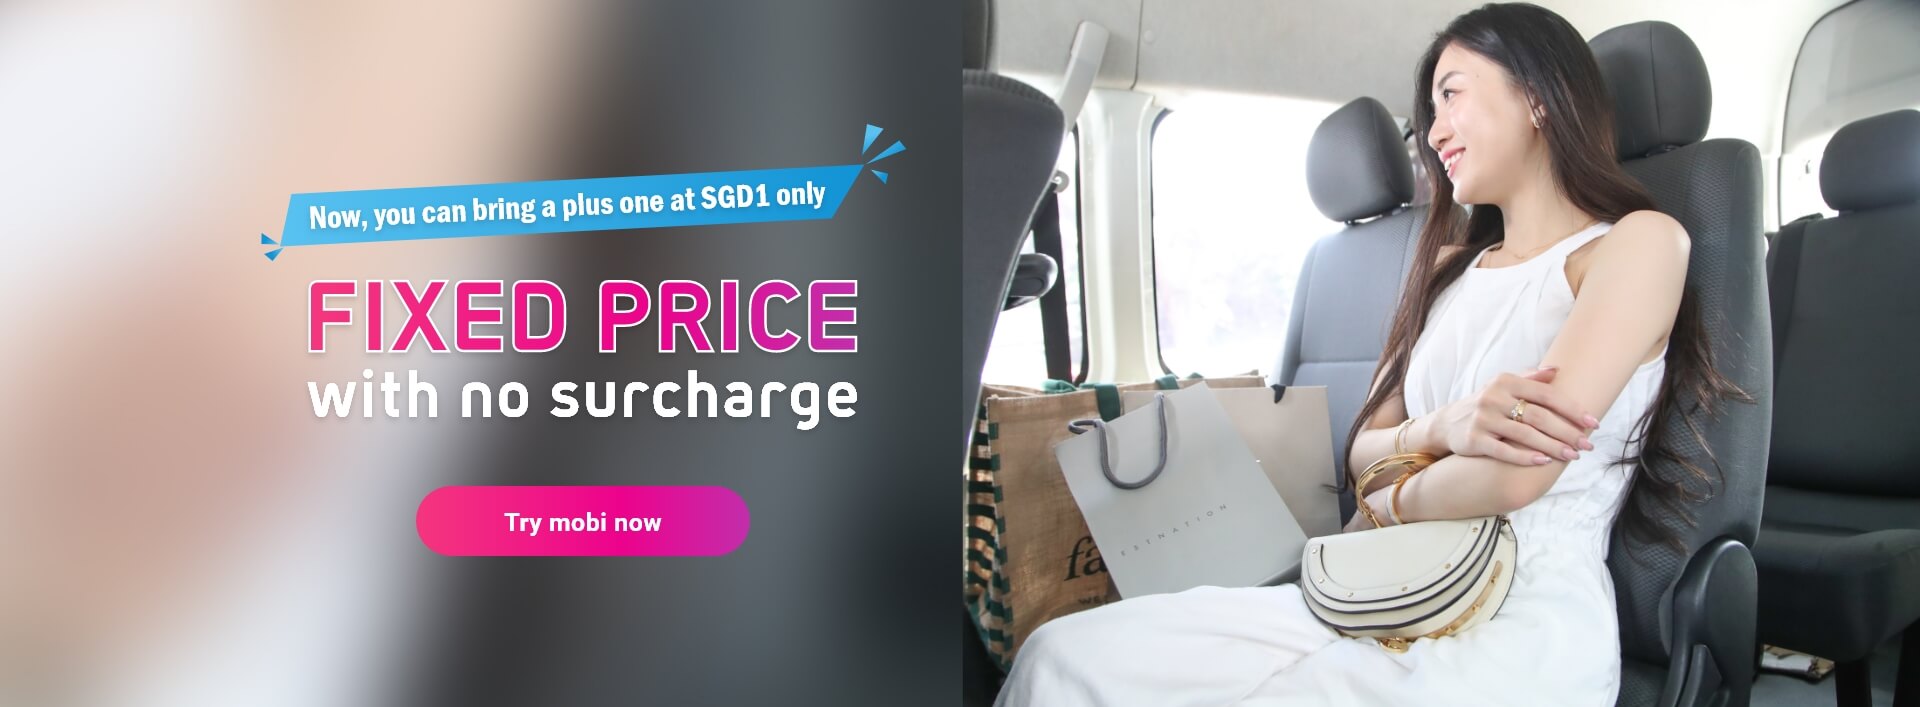 Fixed price with no surcharge